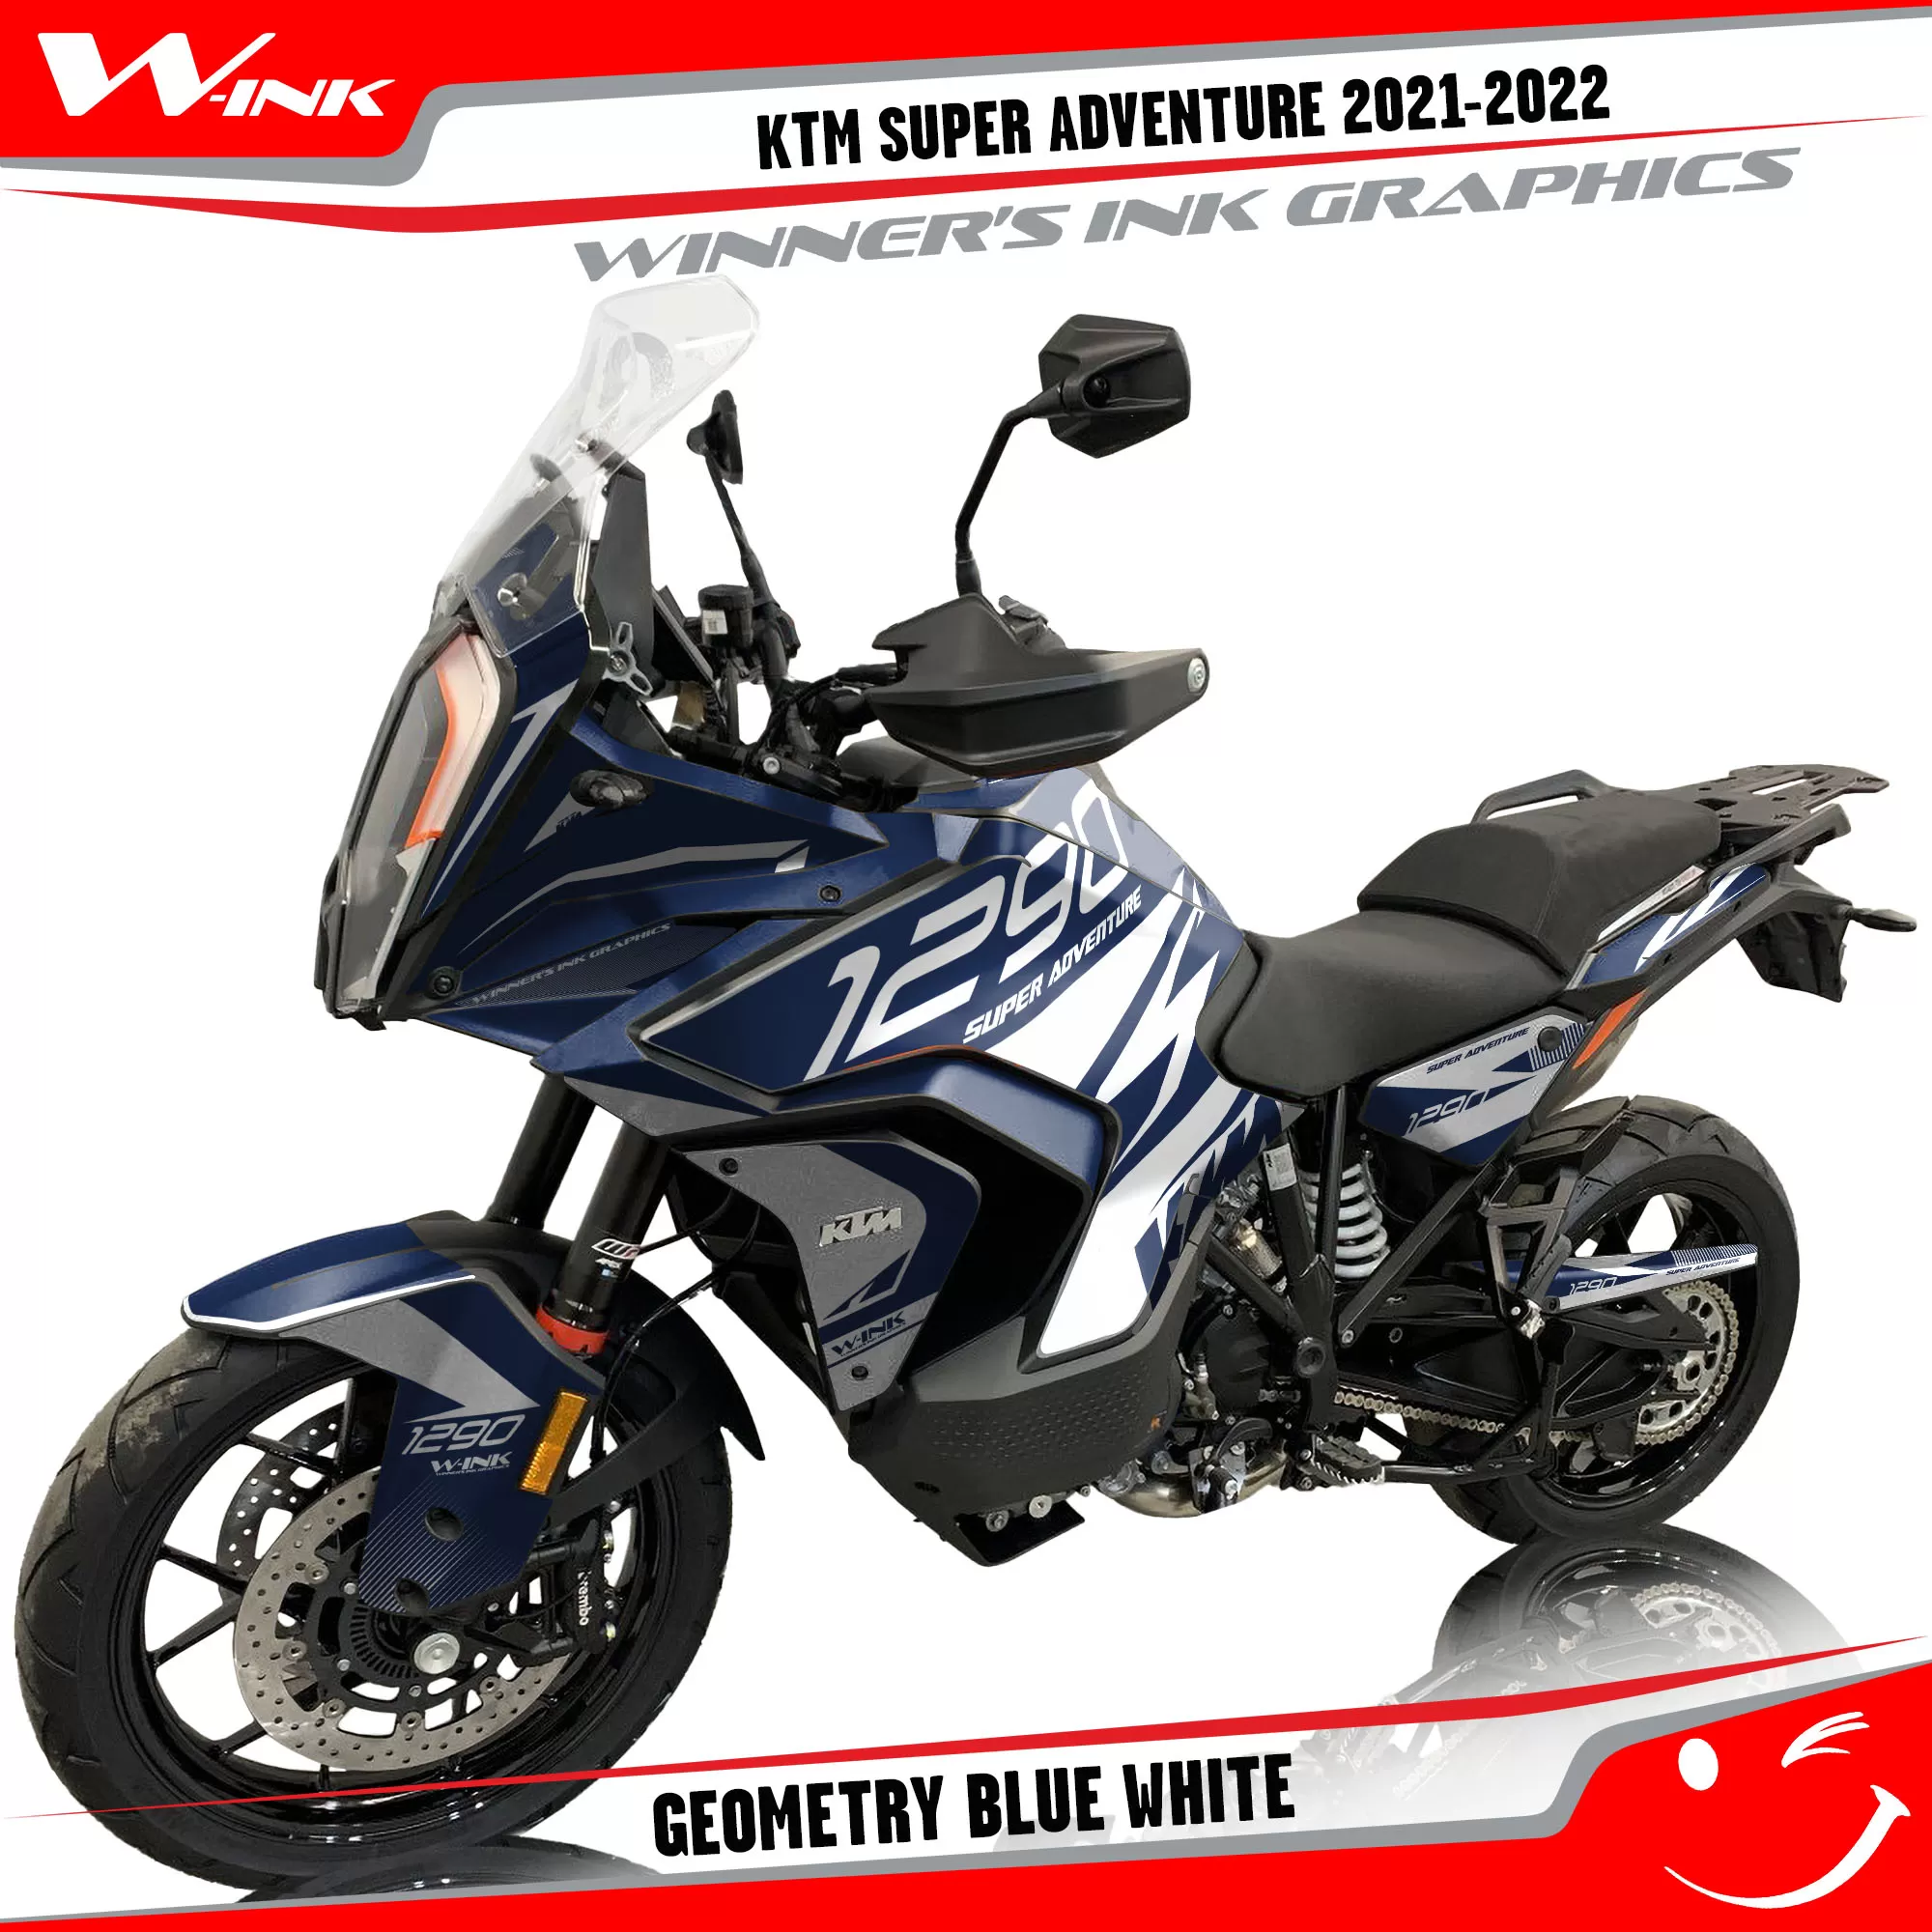 KTM-Super-Adventure-S-2021-2022-graphics-kit-and-decals-with-designs-Geometry-Blue-White